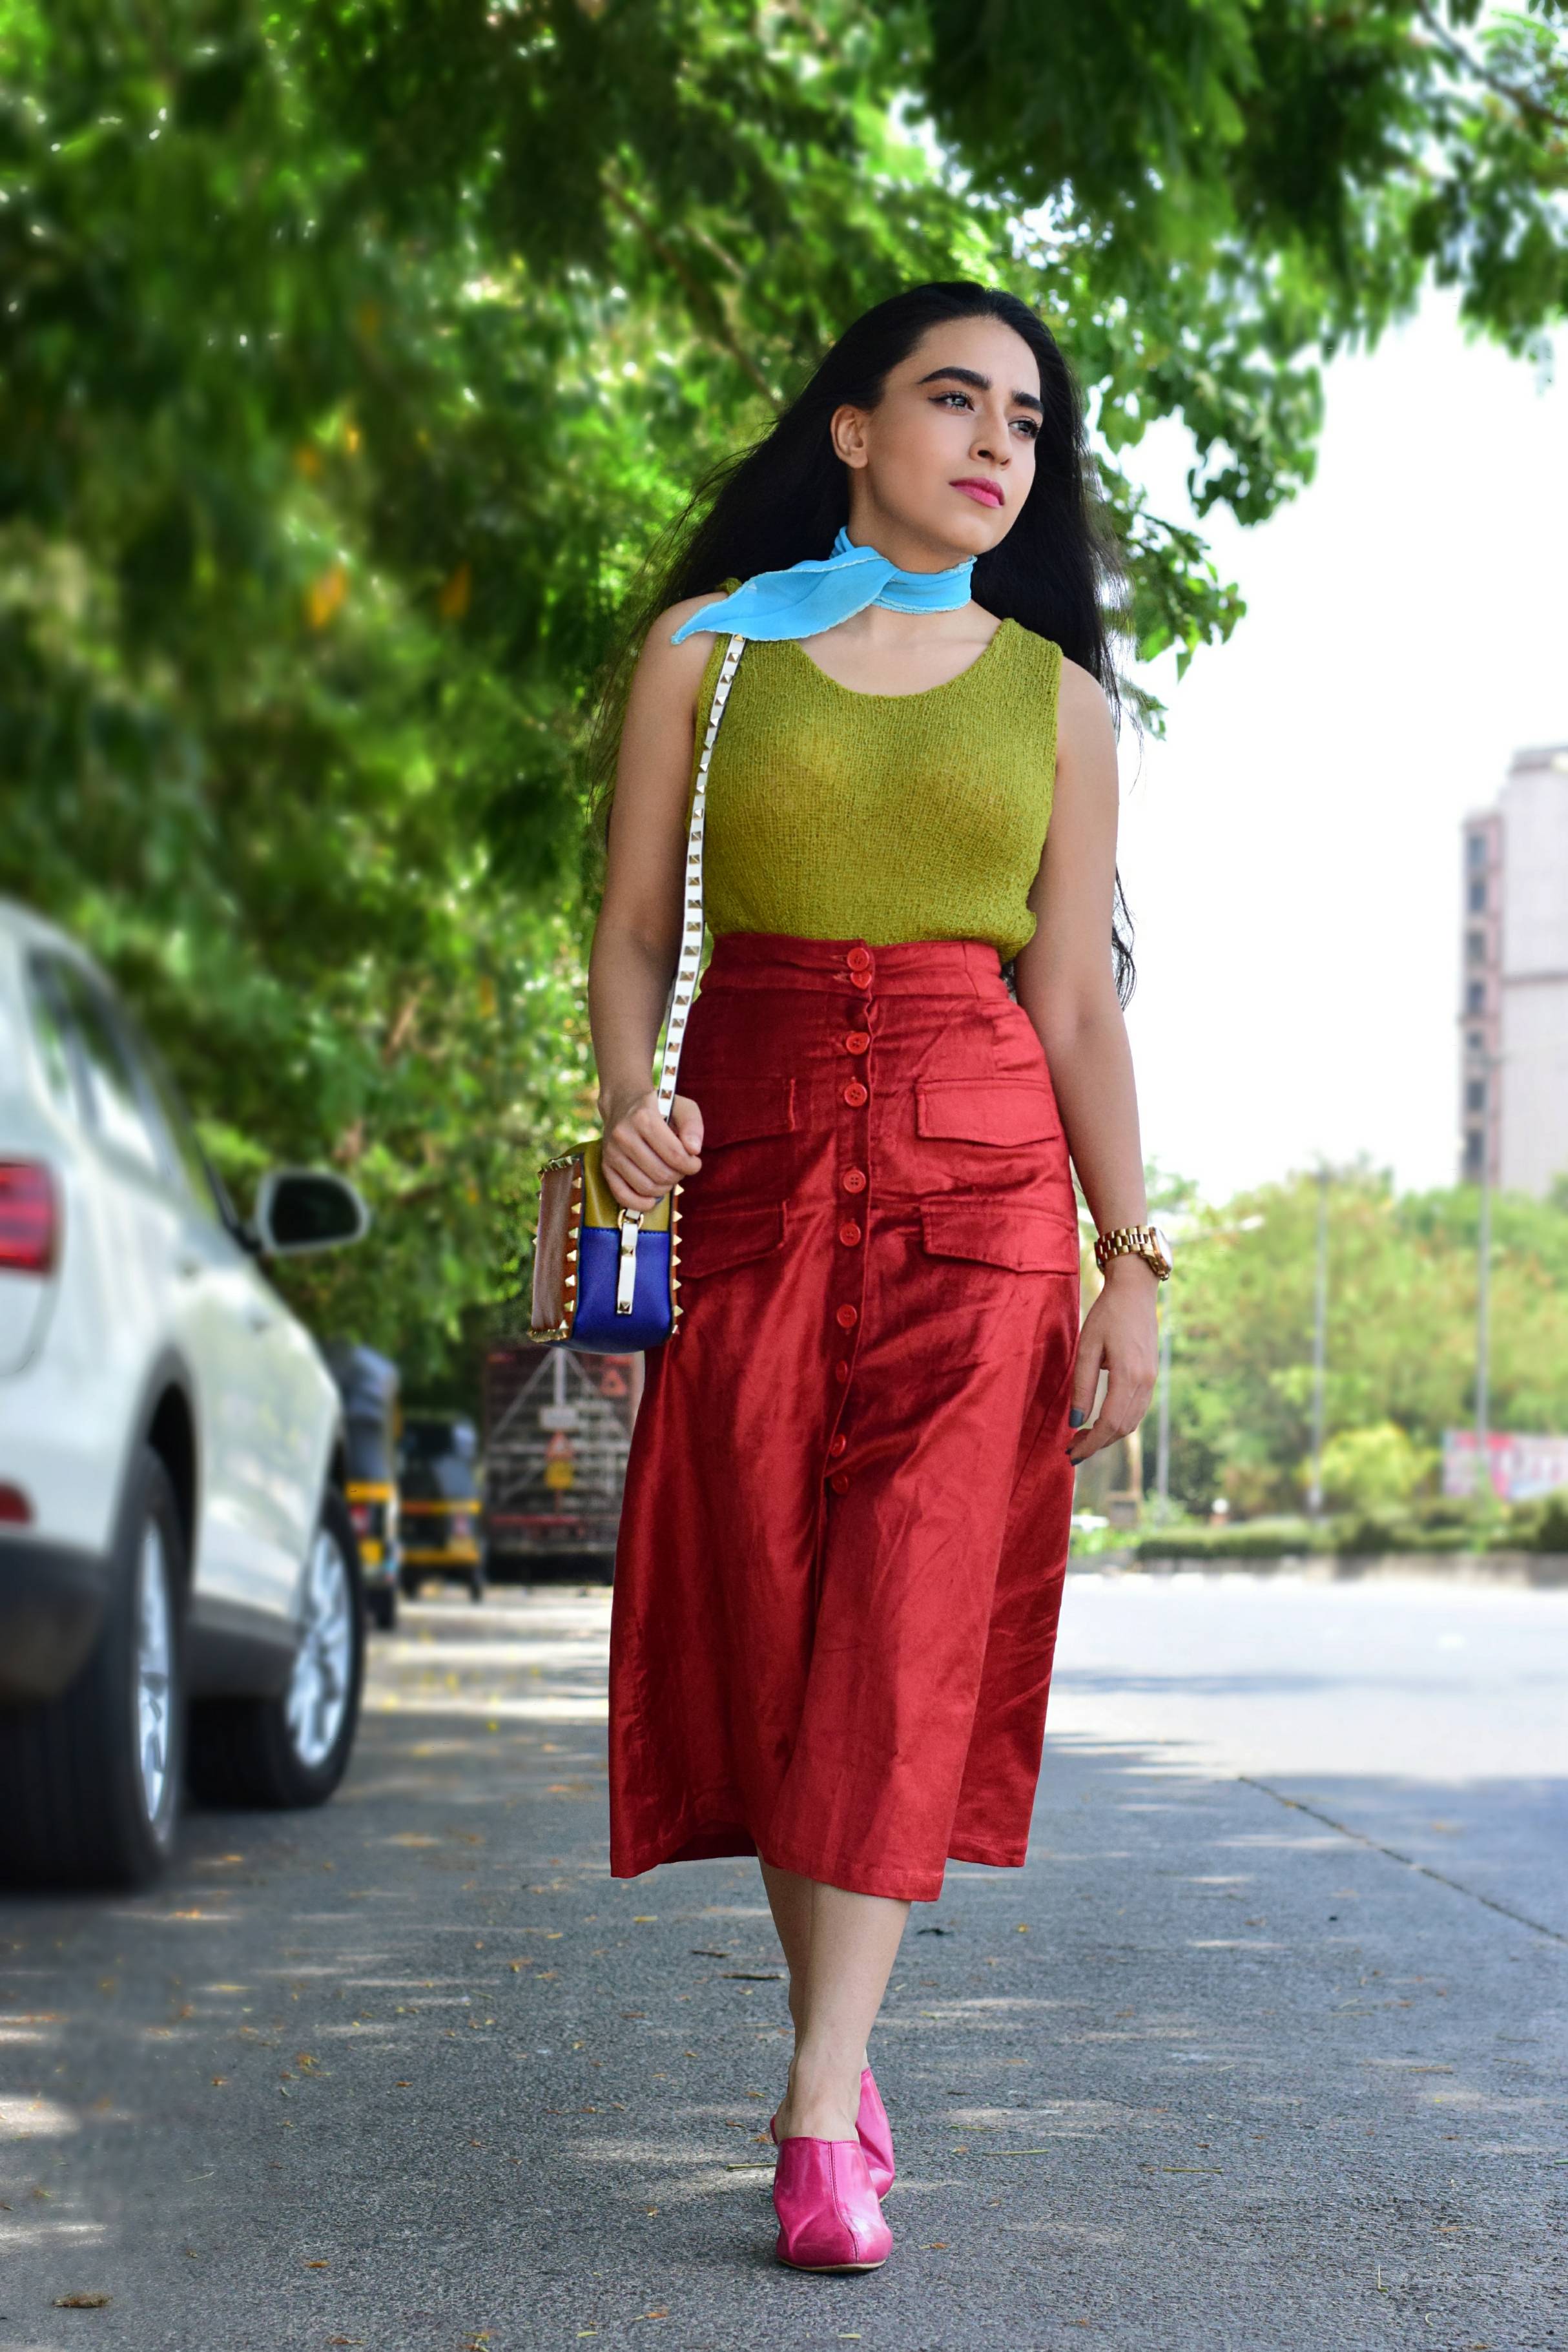 color riot, colorful style, strret style, lakme fashion week, mumbai streets, mumbai street style, fashion week, maroon skirt, skirt style, chartreuse, neck scarf, how to wear a scarf, studded bag, pink mules, mules, colorblocking, outfit, ootd, blogger, fashion blogger